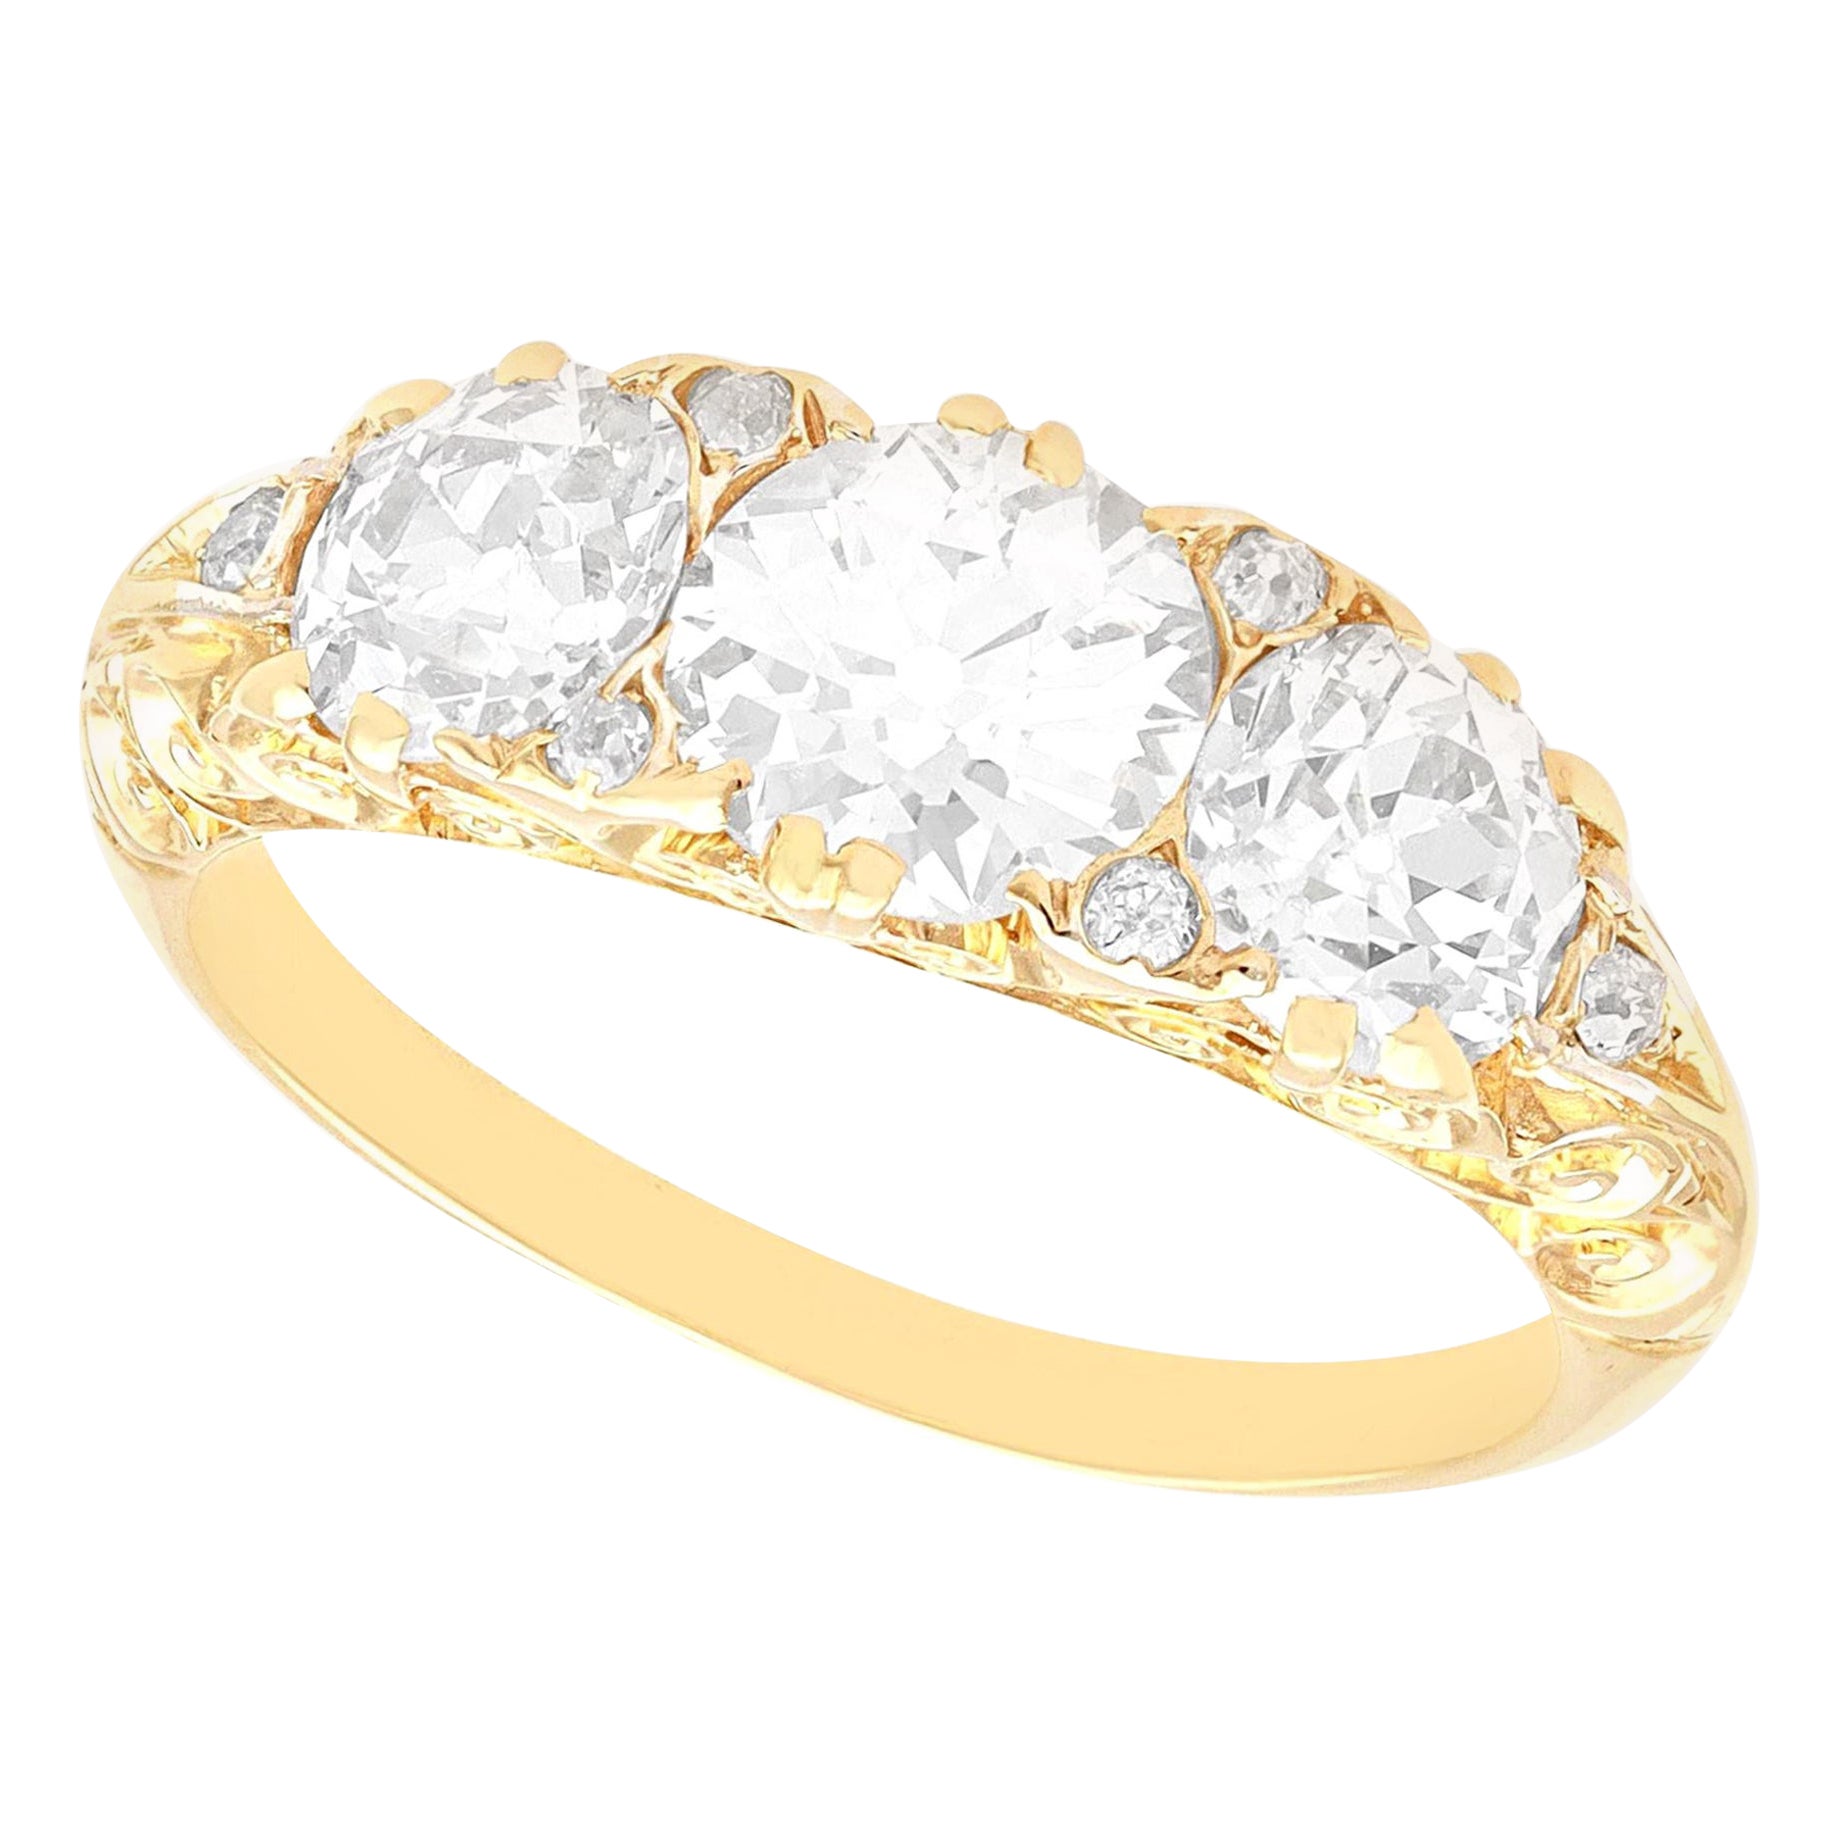 Antique 2.56 Carat Diamond and Yellow Gold Trilogy Ring For Sale